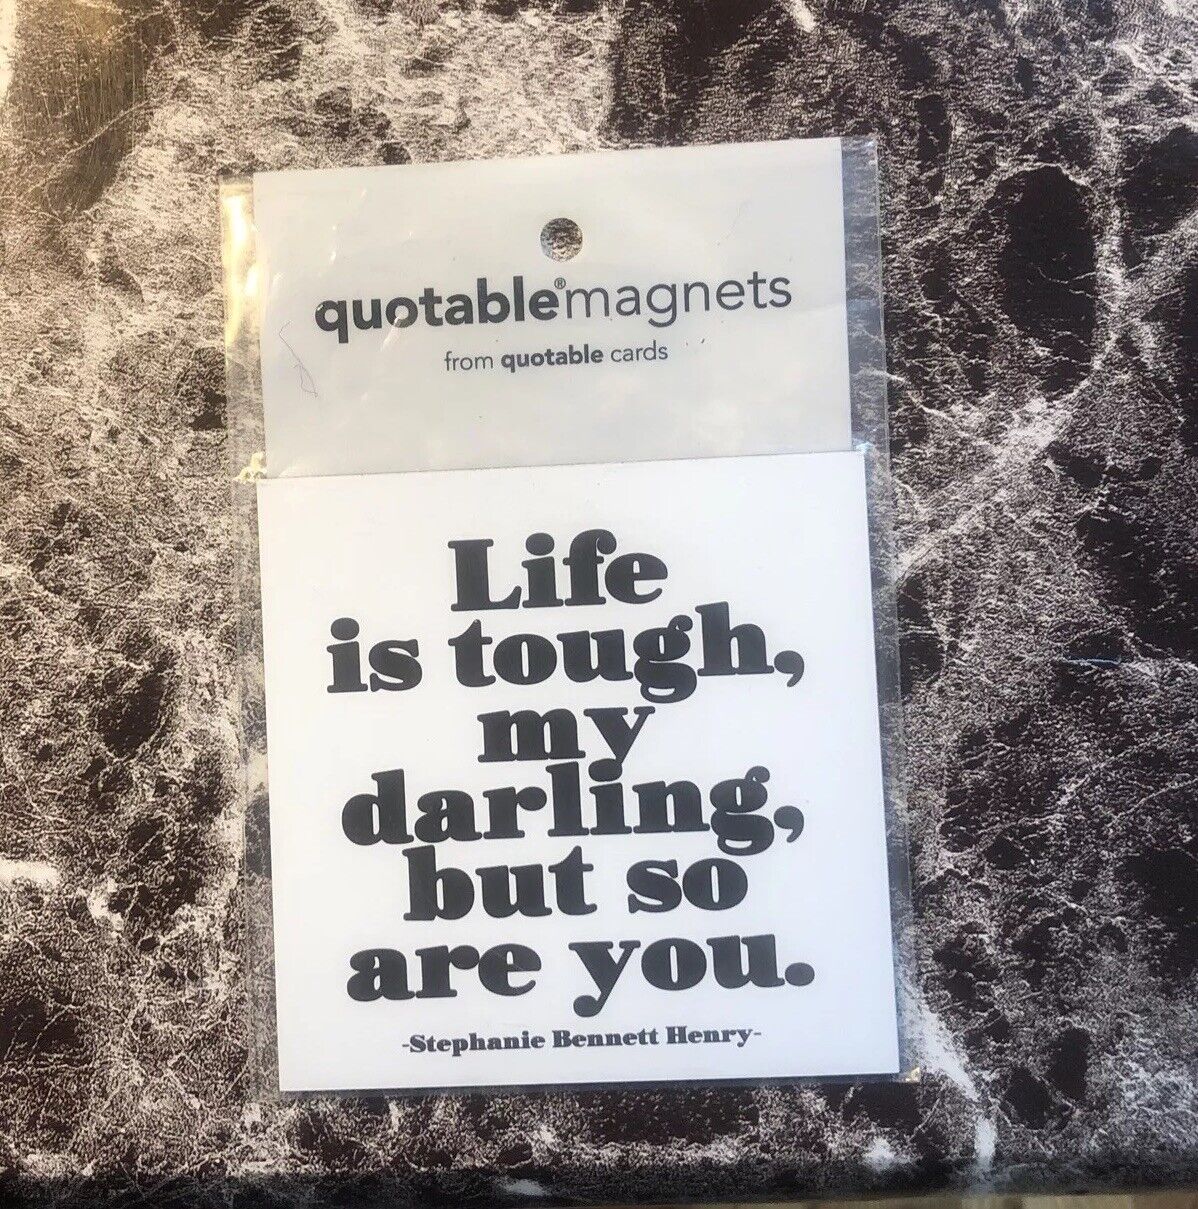 QUOTABLE MAGNETS FROM QUOTABLE CARDS, “Life Is Tough Darling, So Are You”